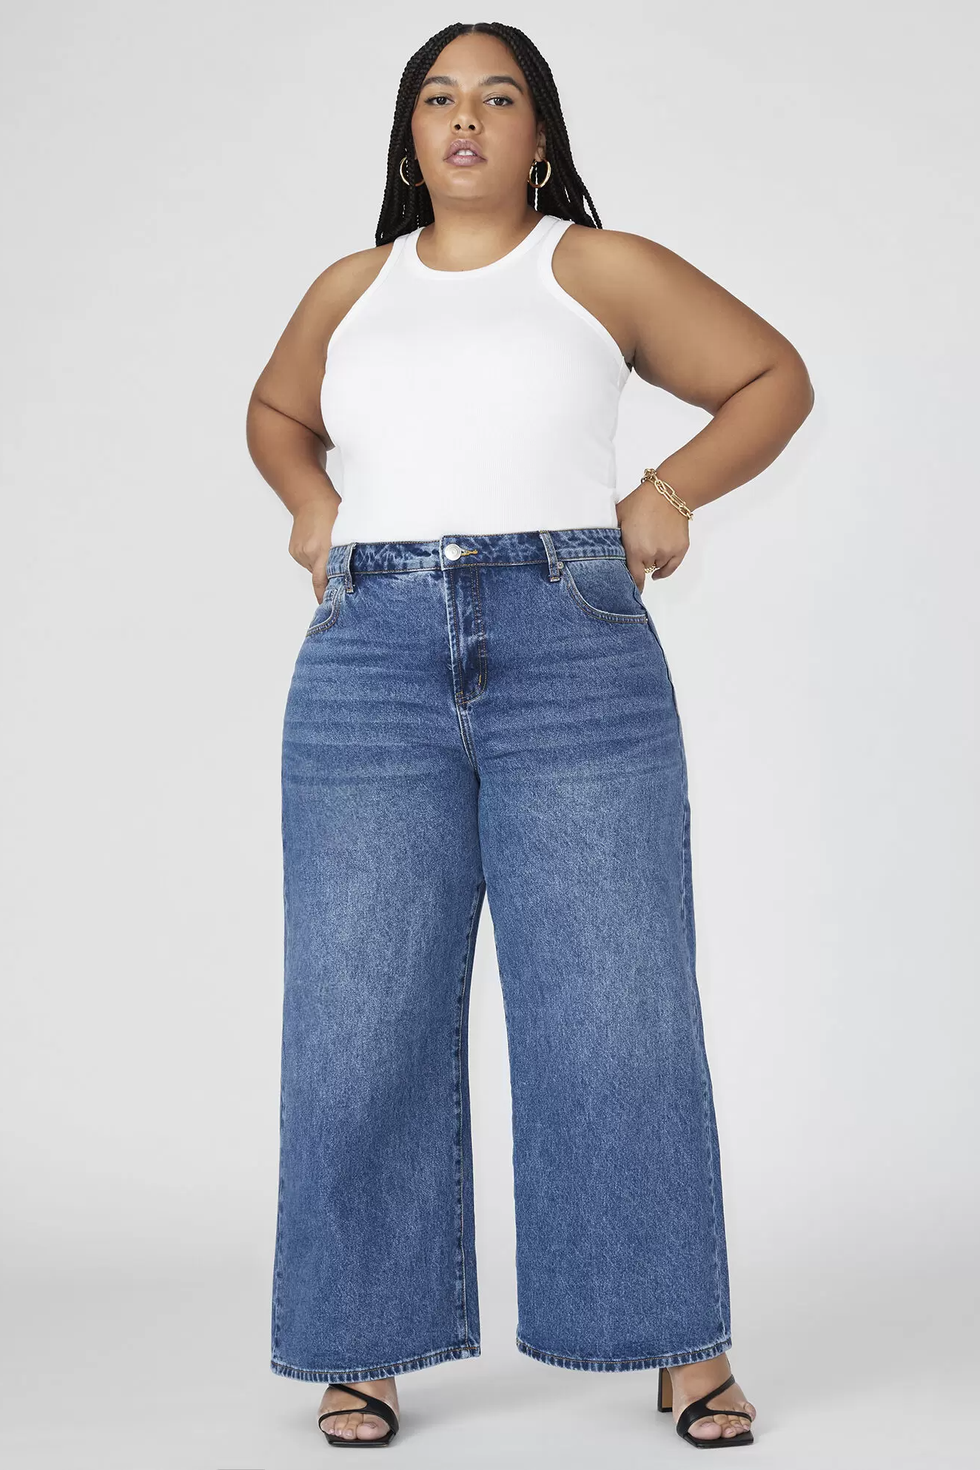 plus size wide leg jeans for women high waist stretchy loose women